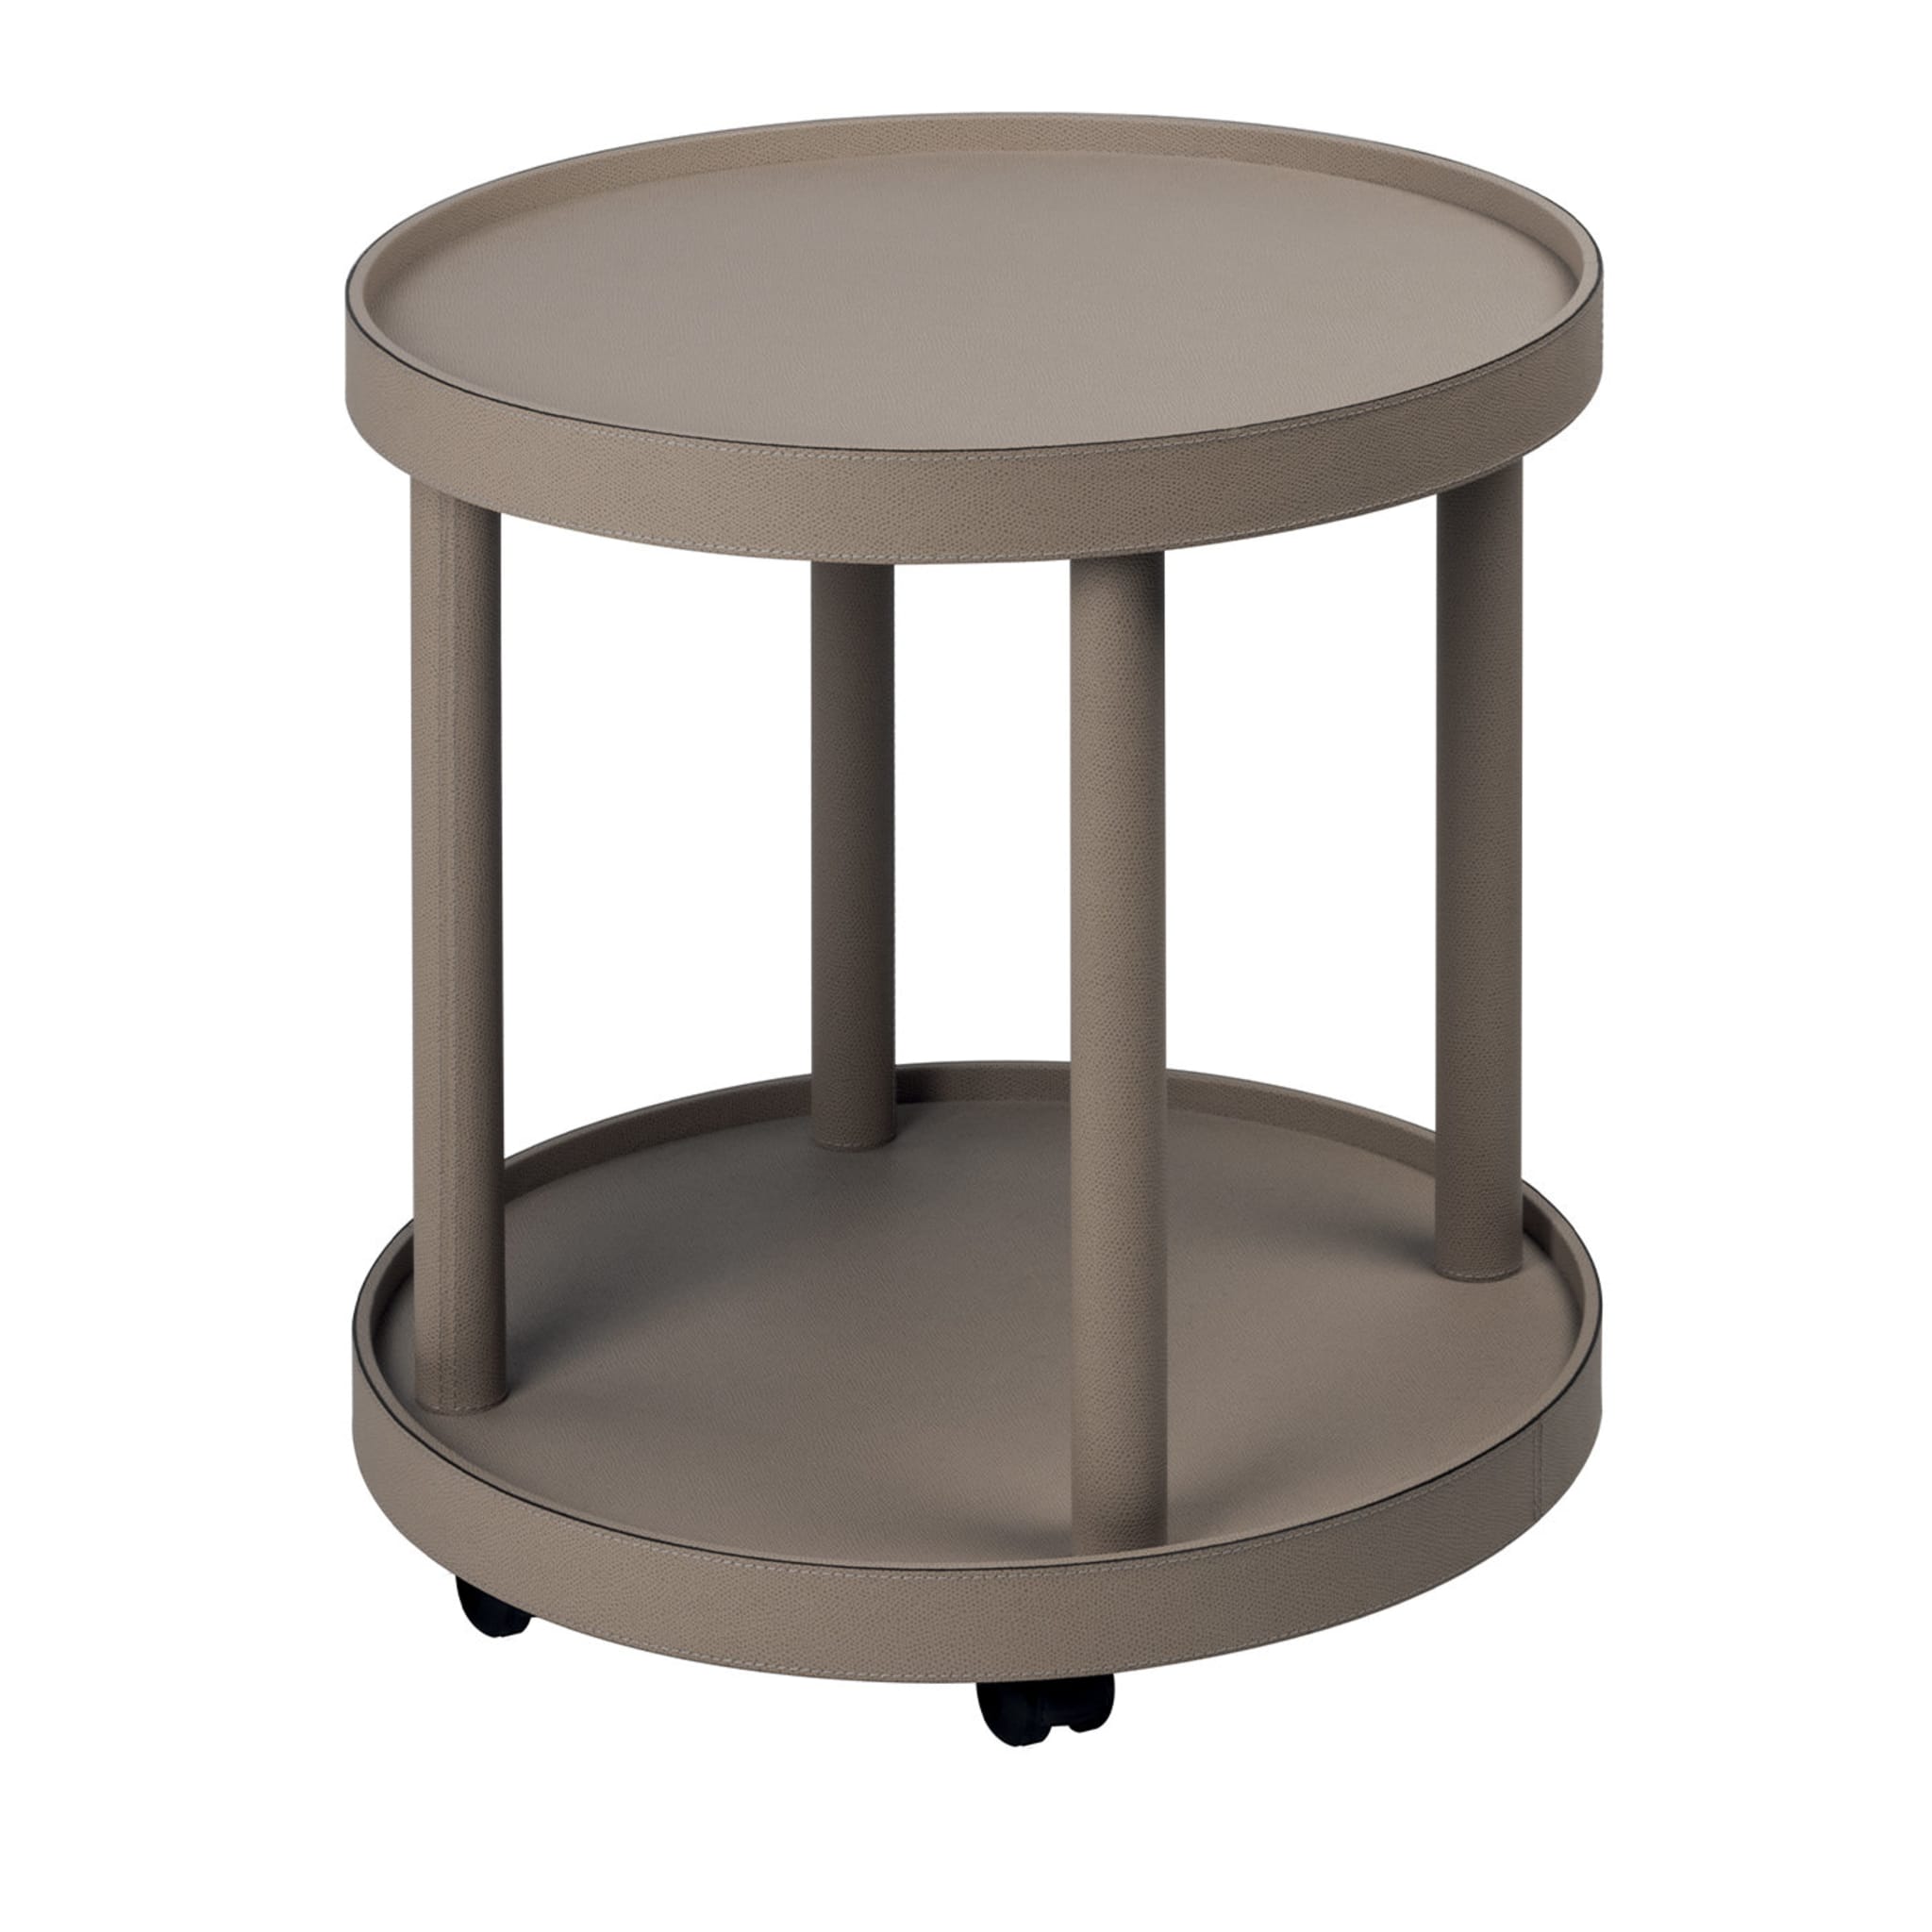 Polo Trolley 2-Tier Beige Round Table - Main view